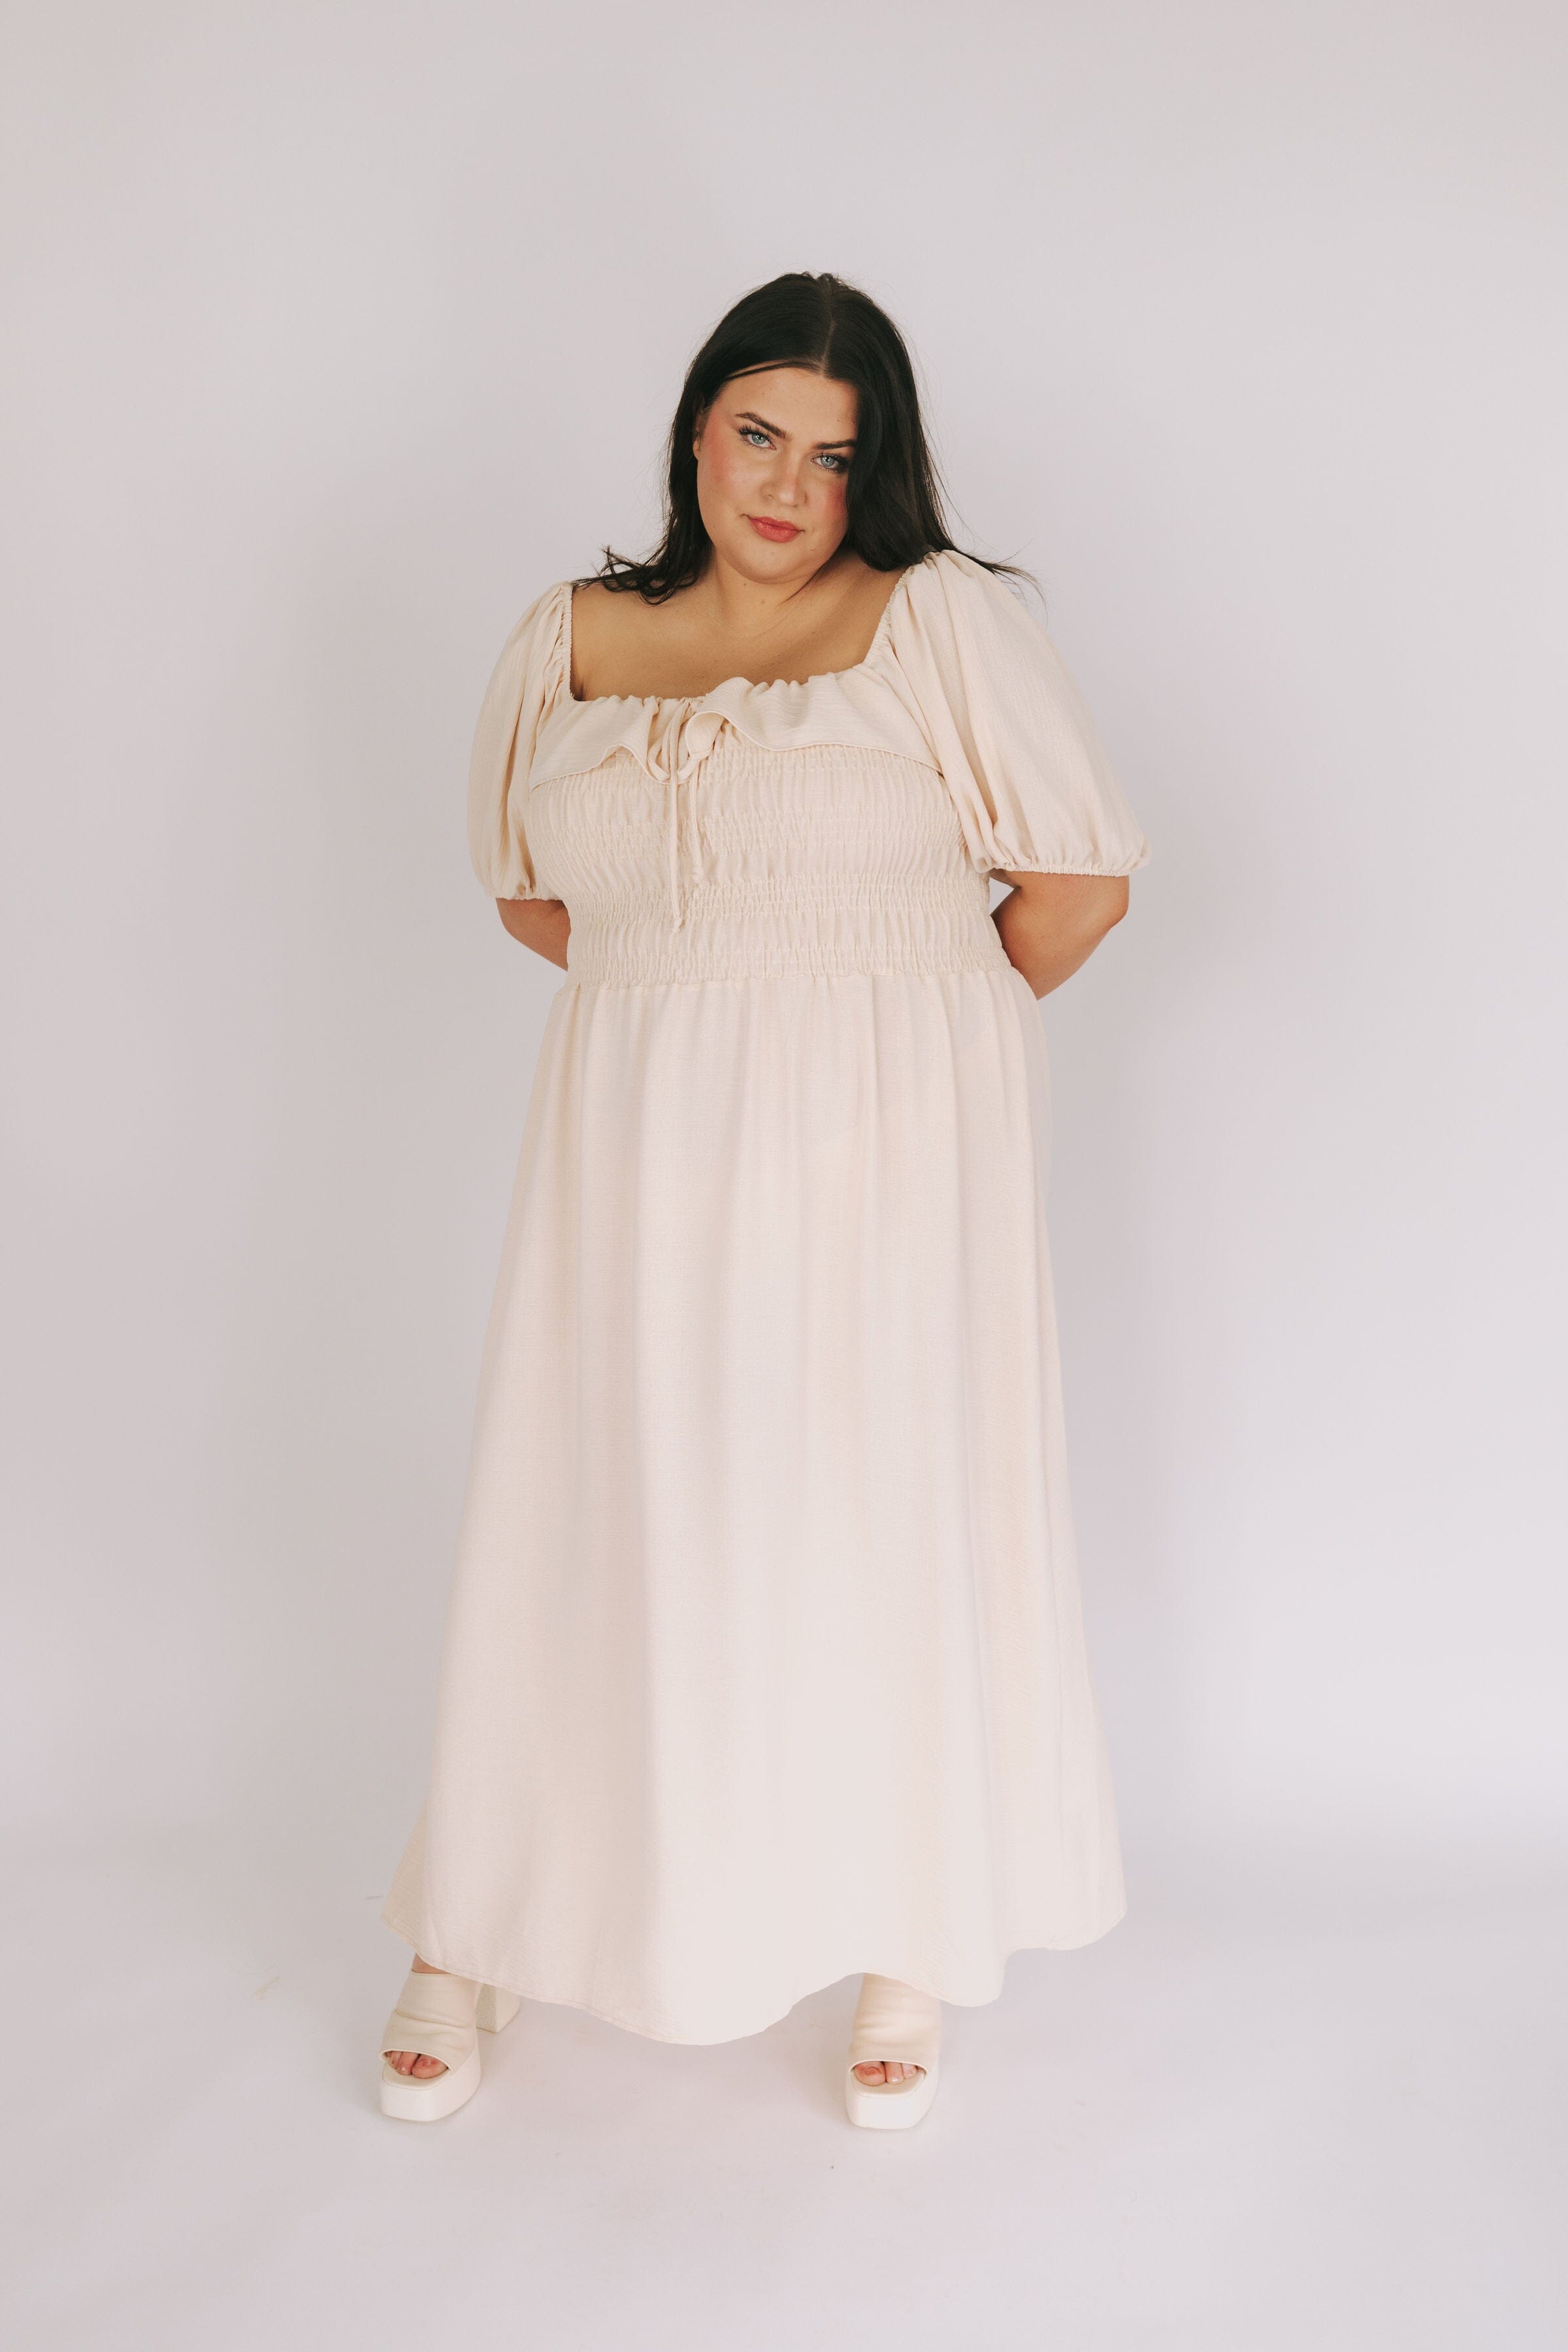 PLUS SIZE - Can't Leave You Dress - 2 Colors!